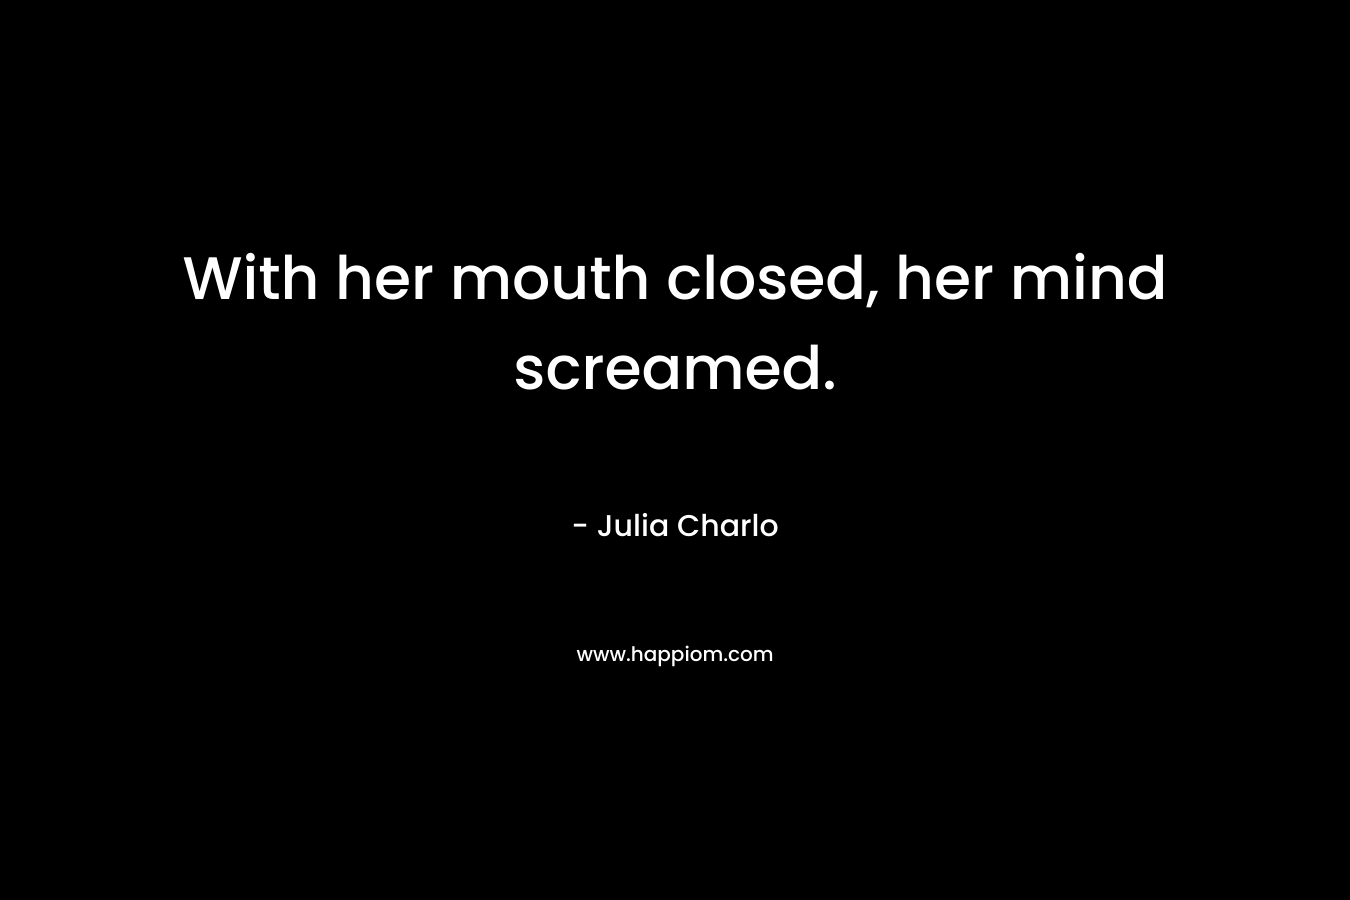 With her mouth closed, her mind screamed.